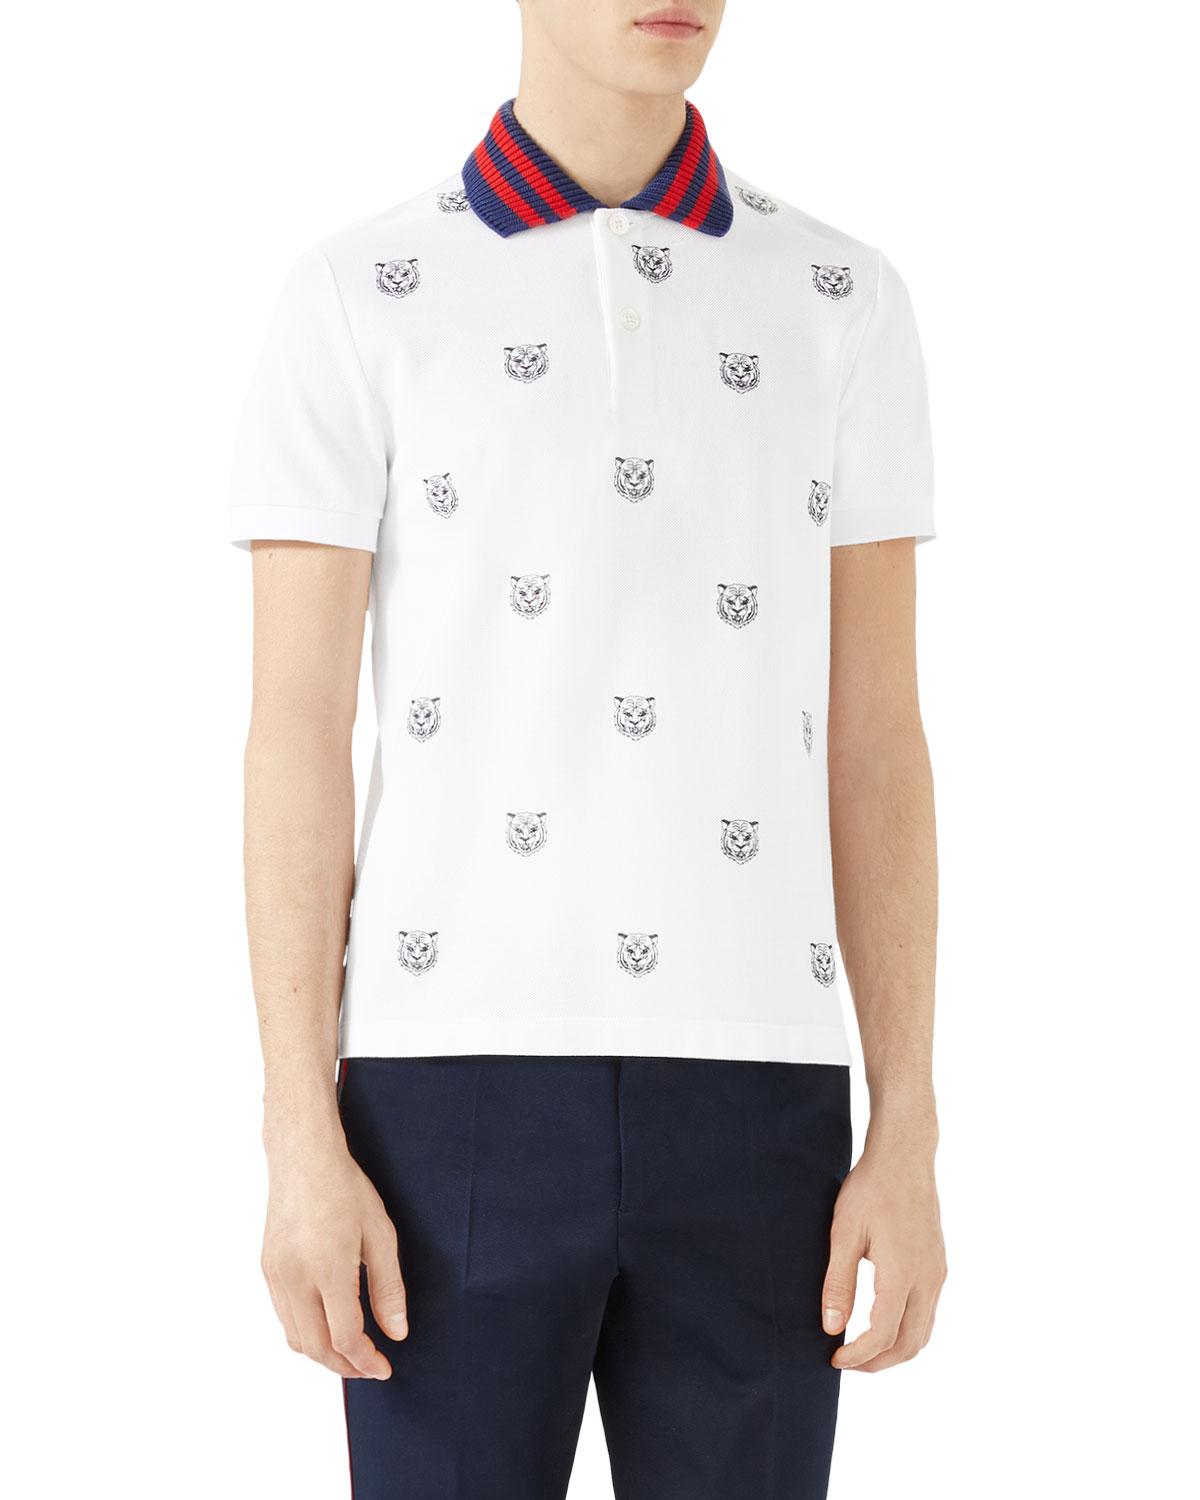 Gucci Cotton Tiger Head Polo Shirt in White for Men - Lyst